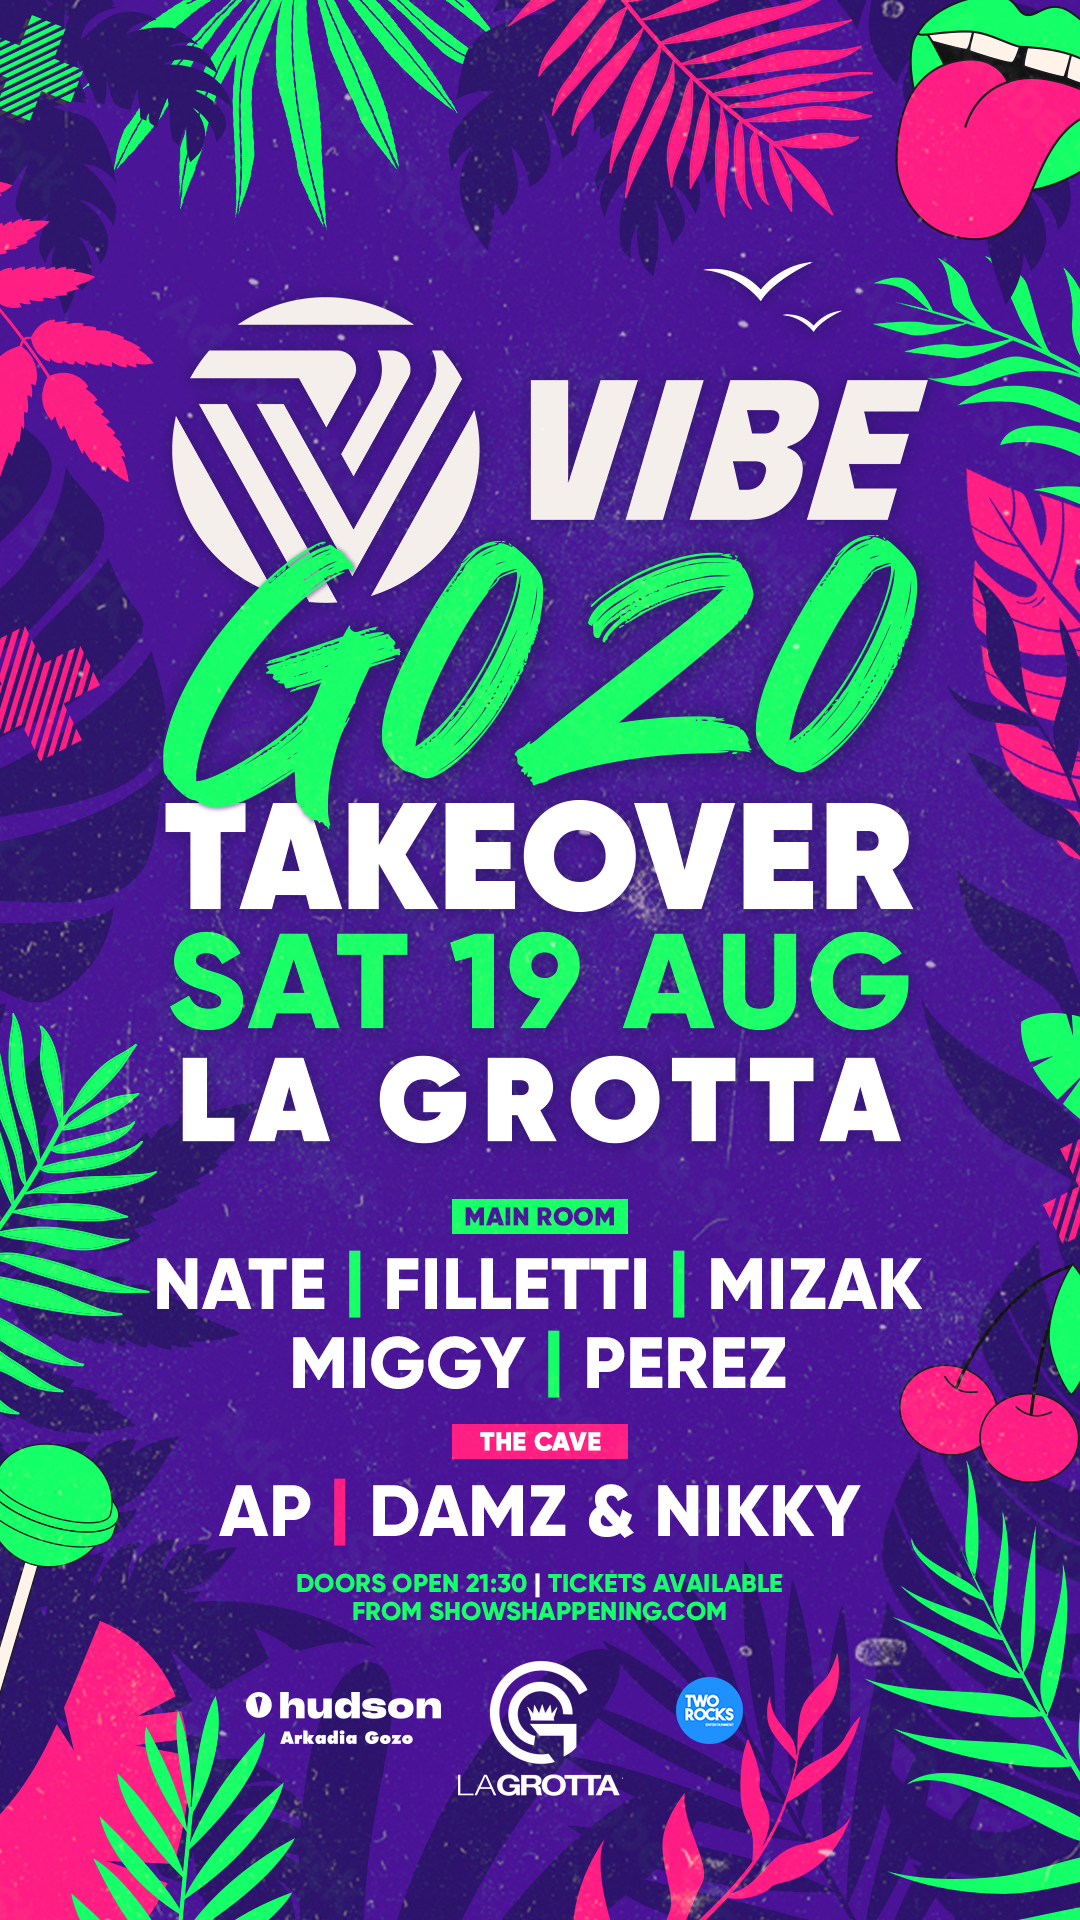 THE VIBE GOZO TAKEOVER 💜 poster